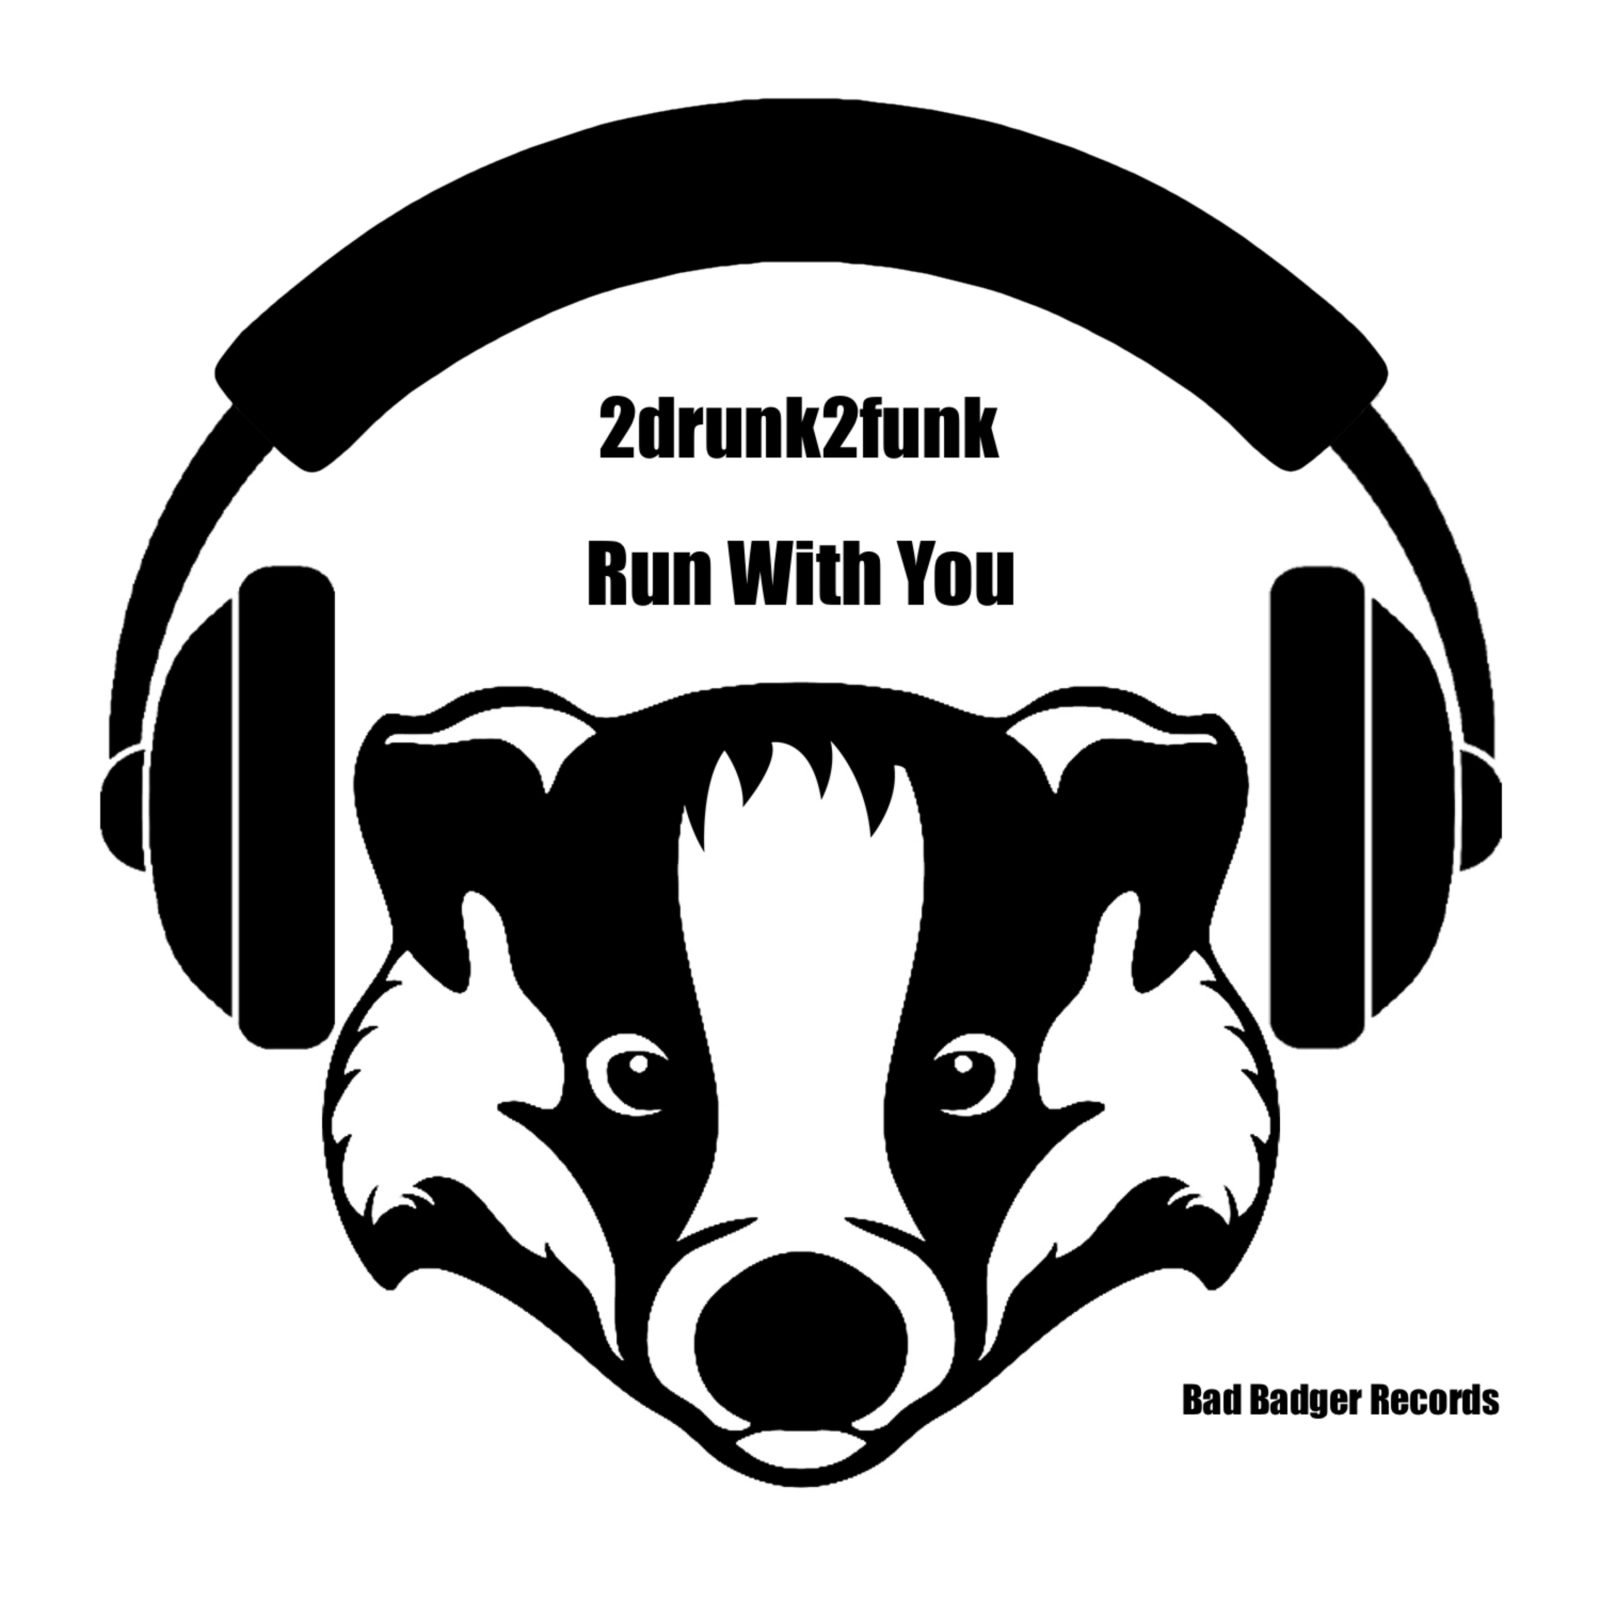 Run with you - 2drunk2funk